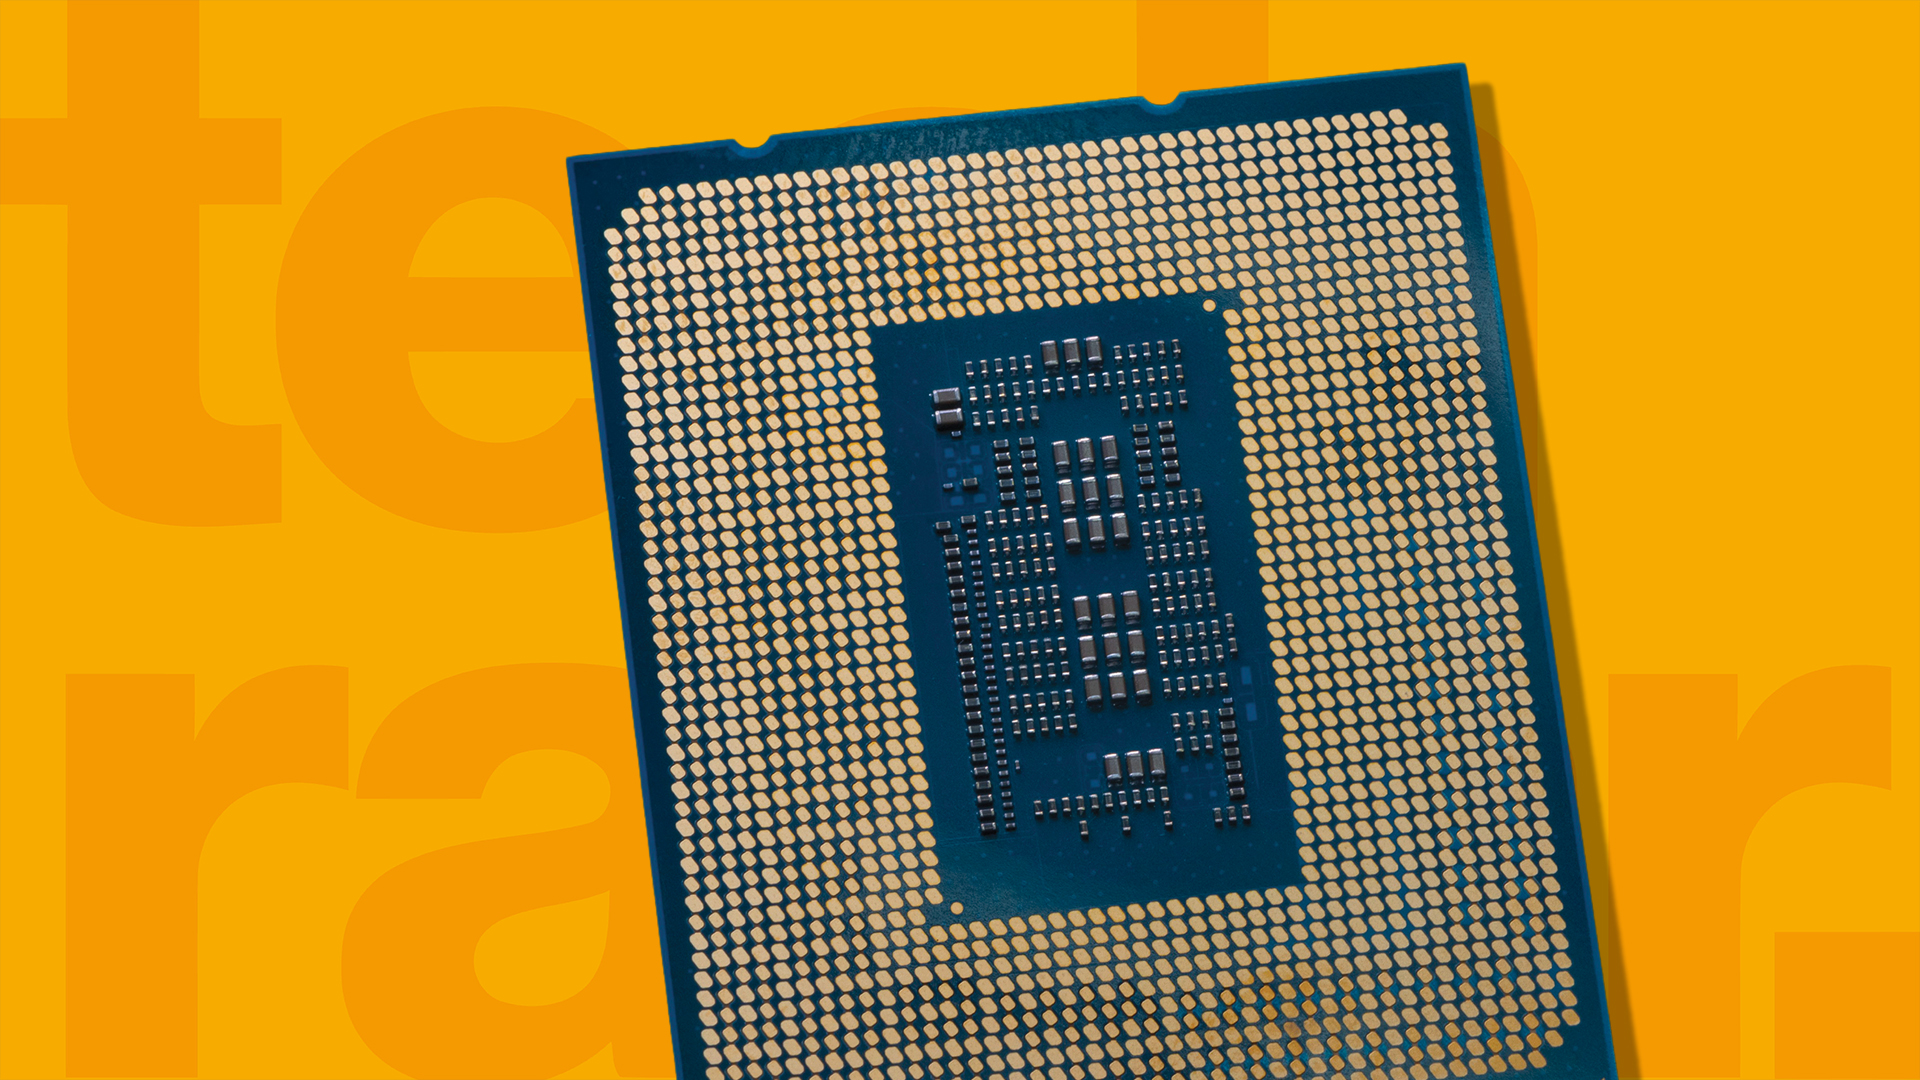 Pluche pop Kostuums verdieping The best processors for 2023: top CPUs from AMD and Intel | TechRadar